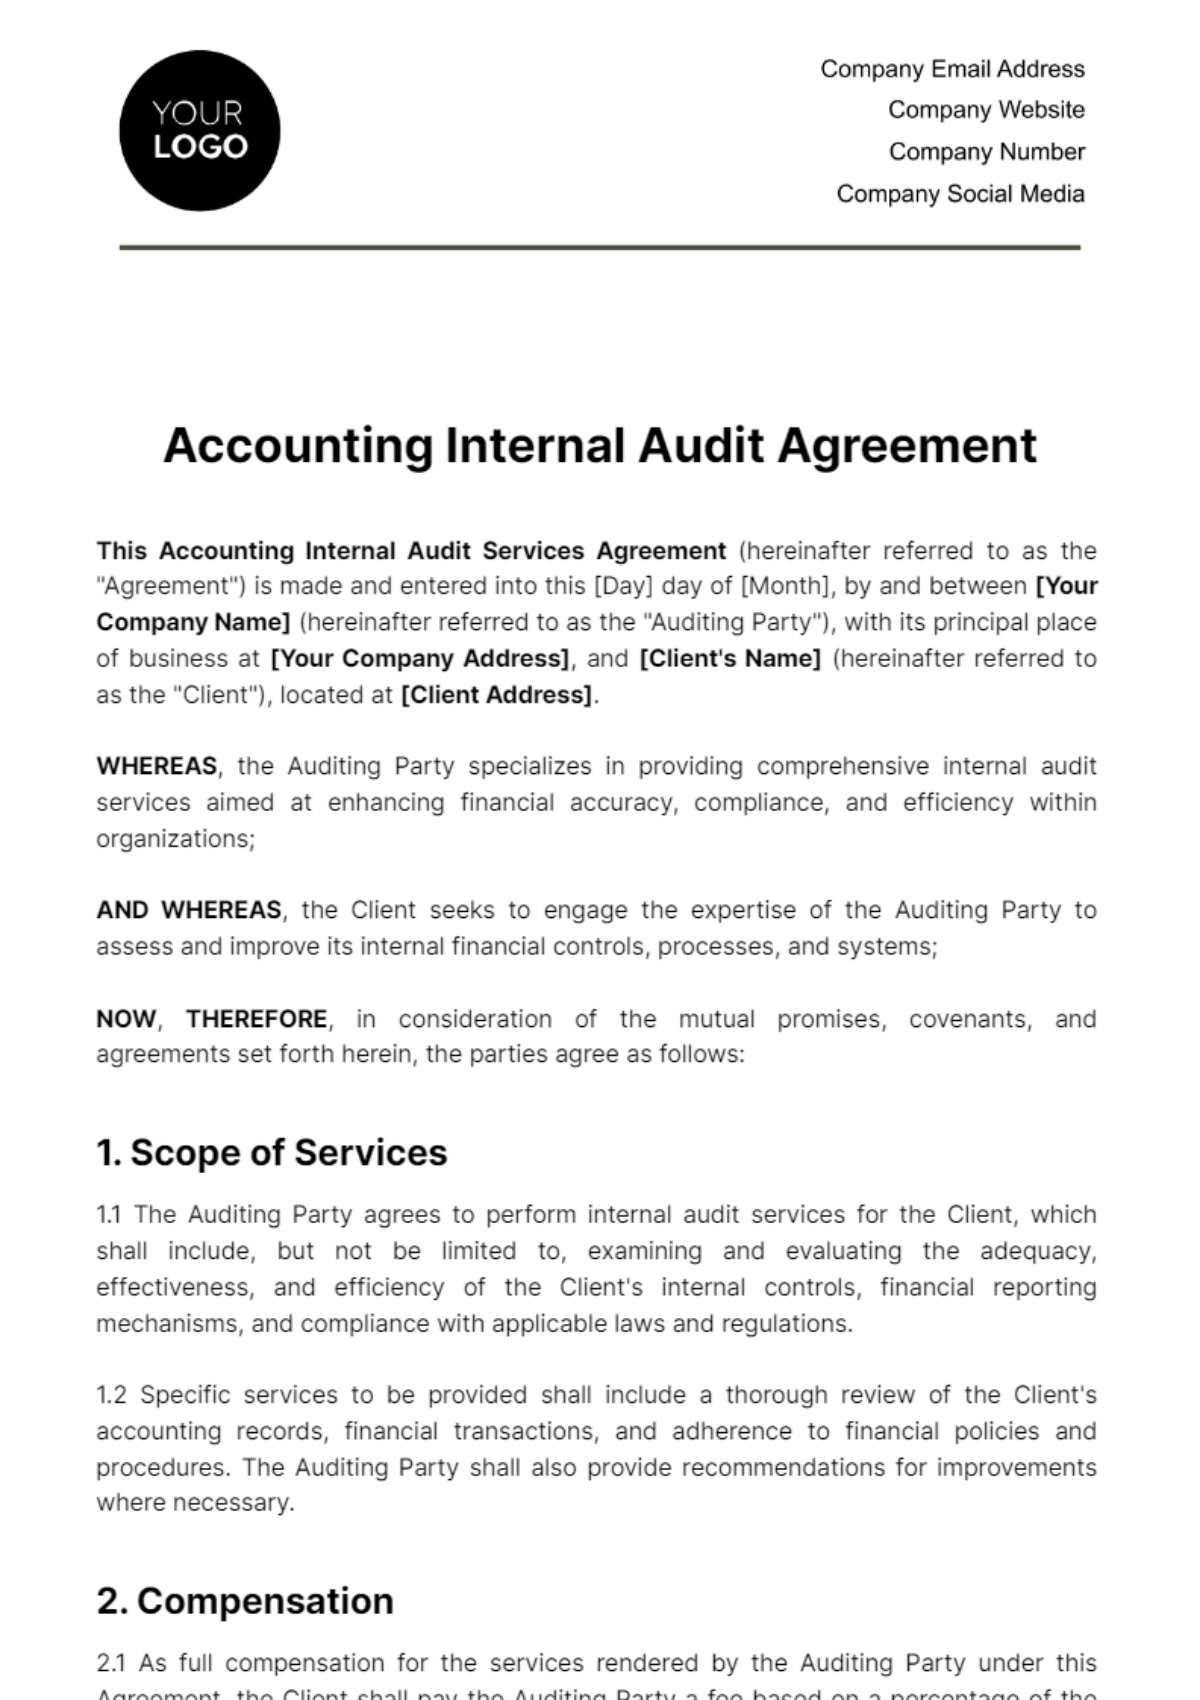 Accounting Internal Audit Agreement Template